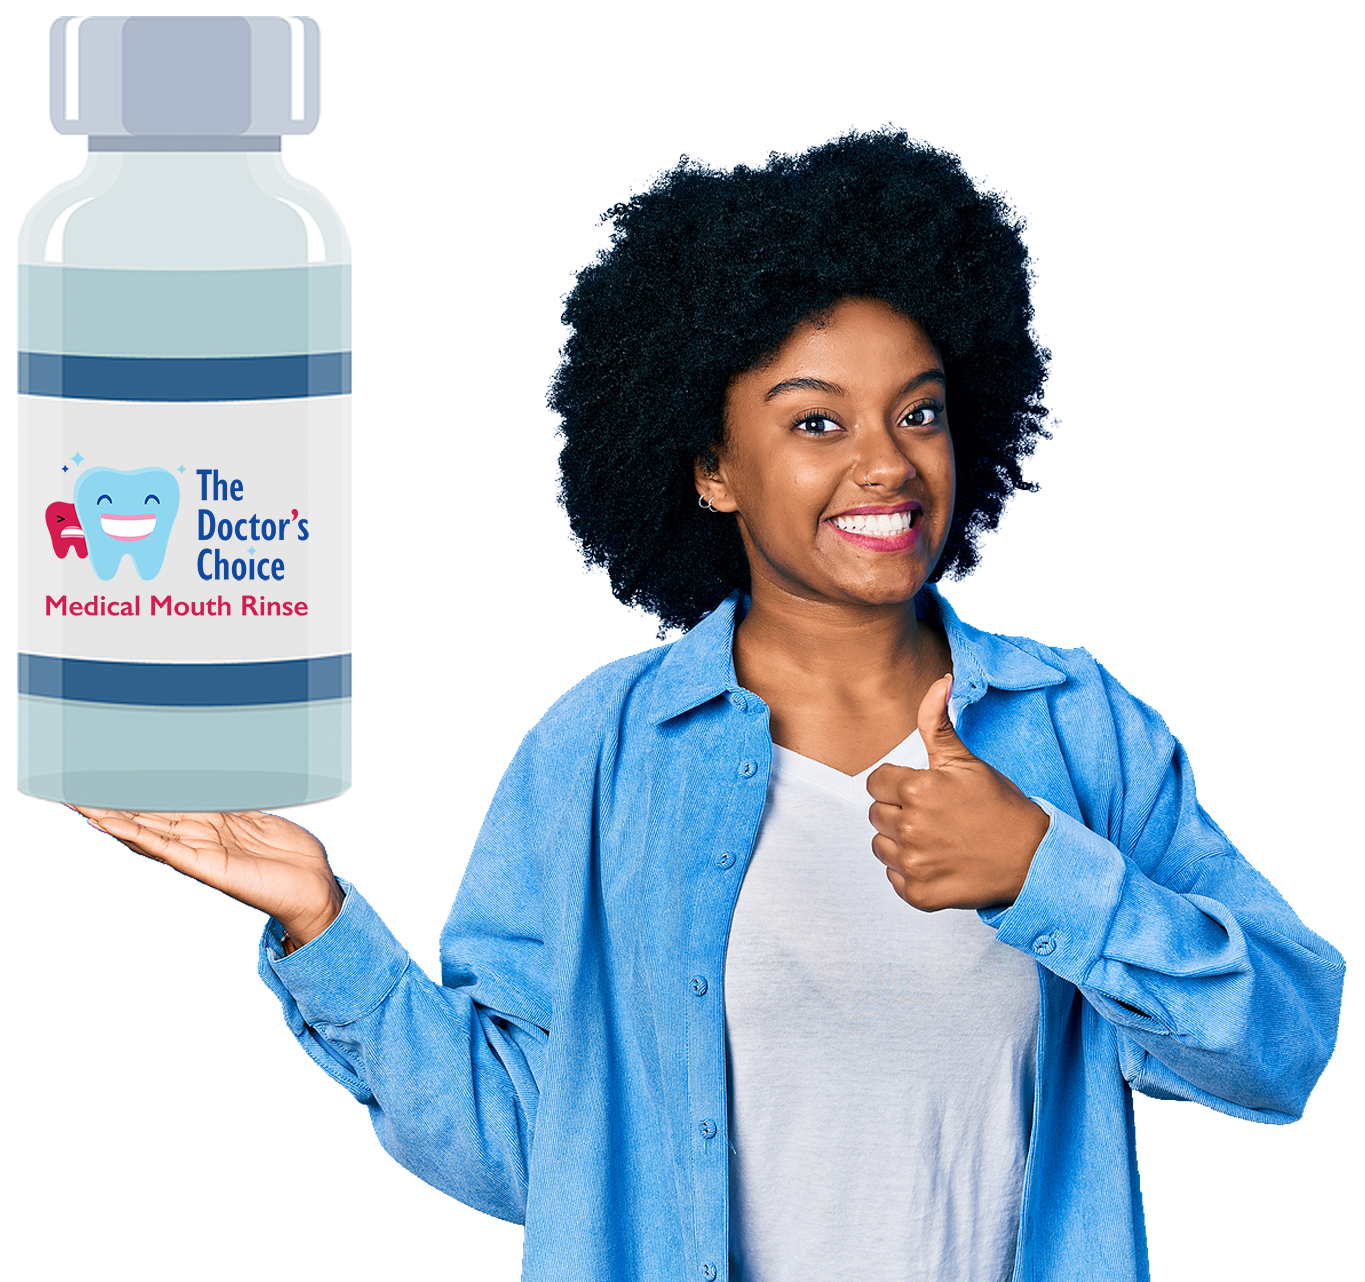 Energetic young lady giving the thumbs up holding a bottle of the Doctors Choice medical mouth rinse